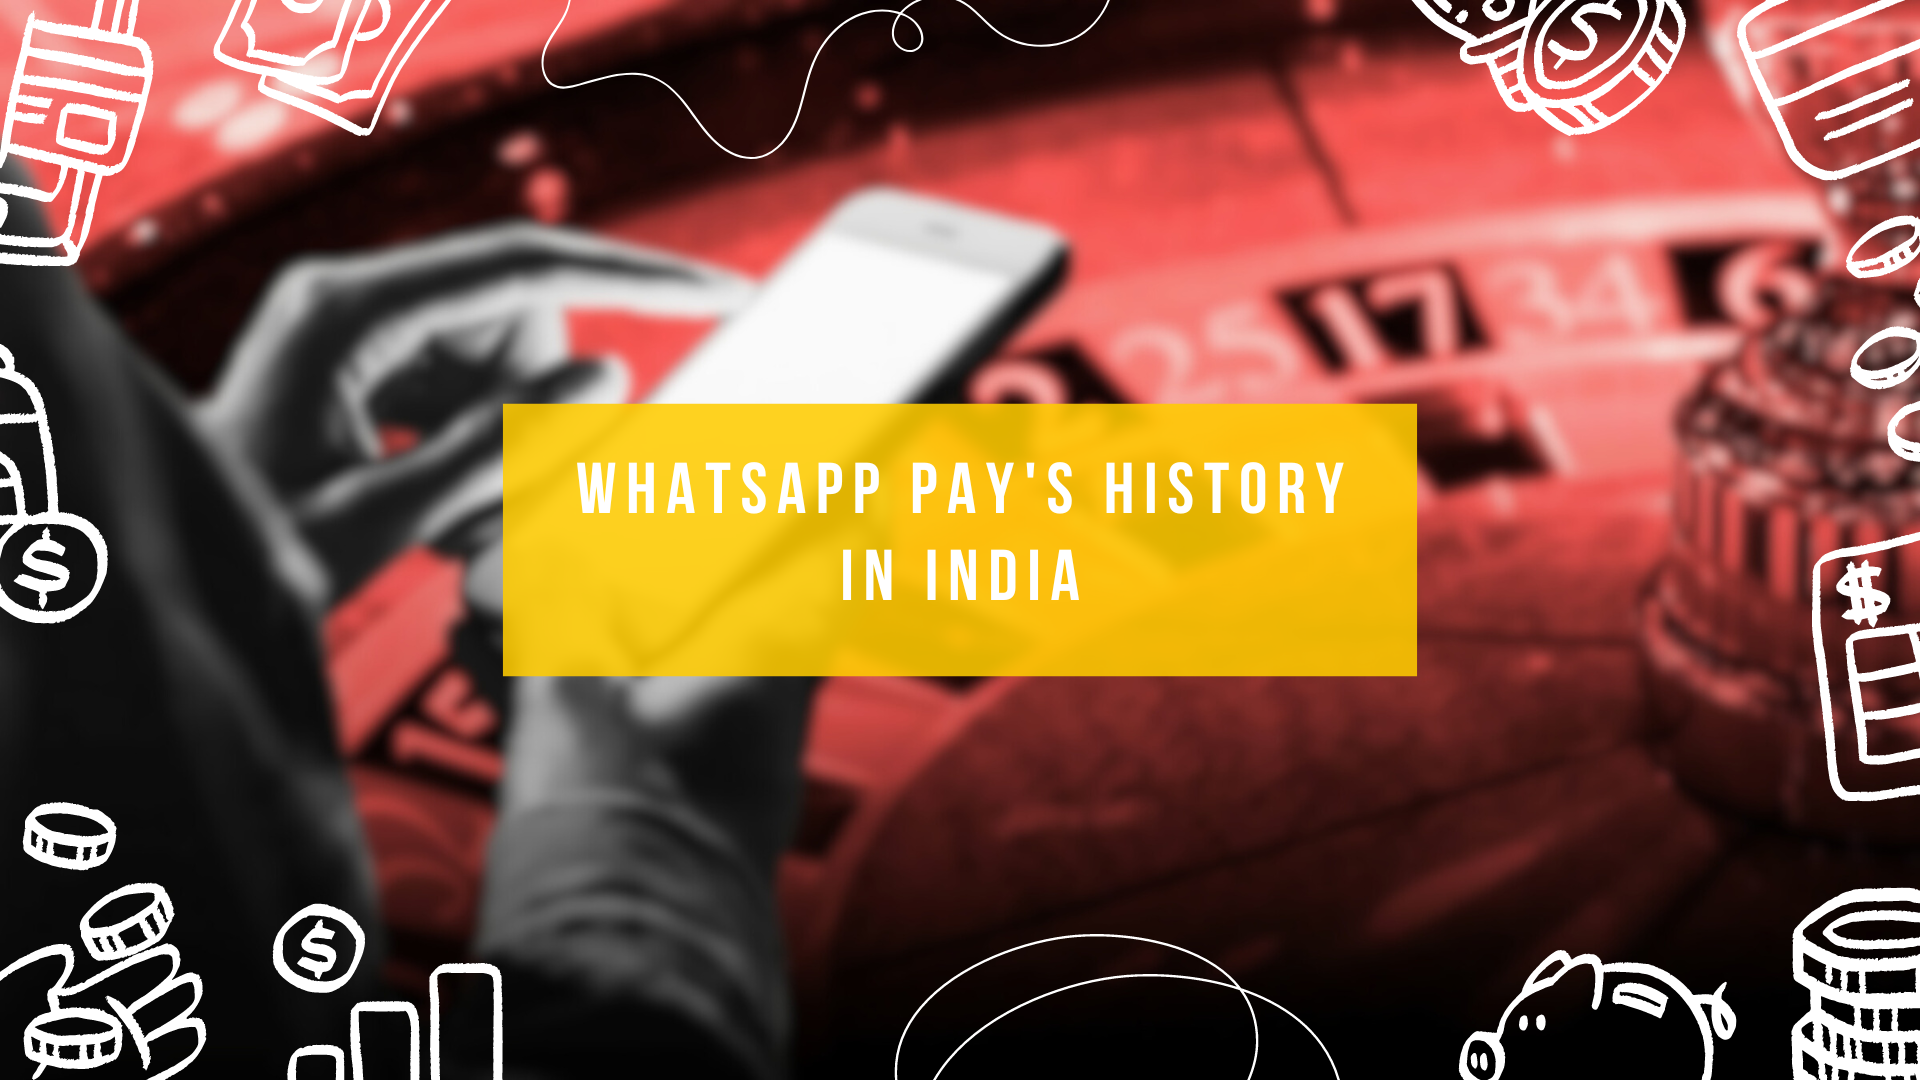 WhatsApp Pay's History in India